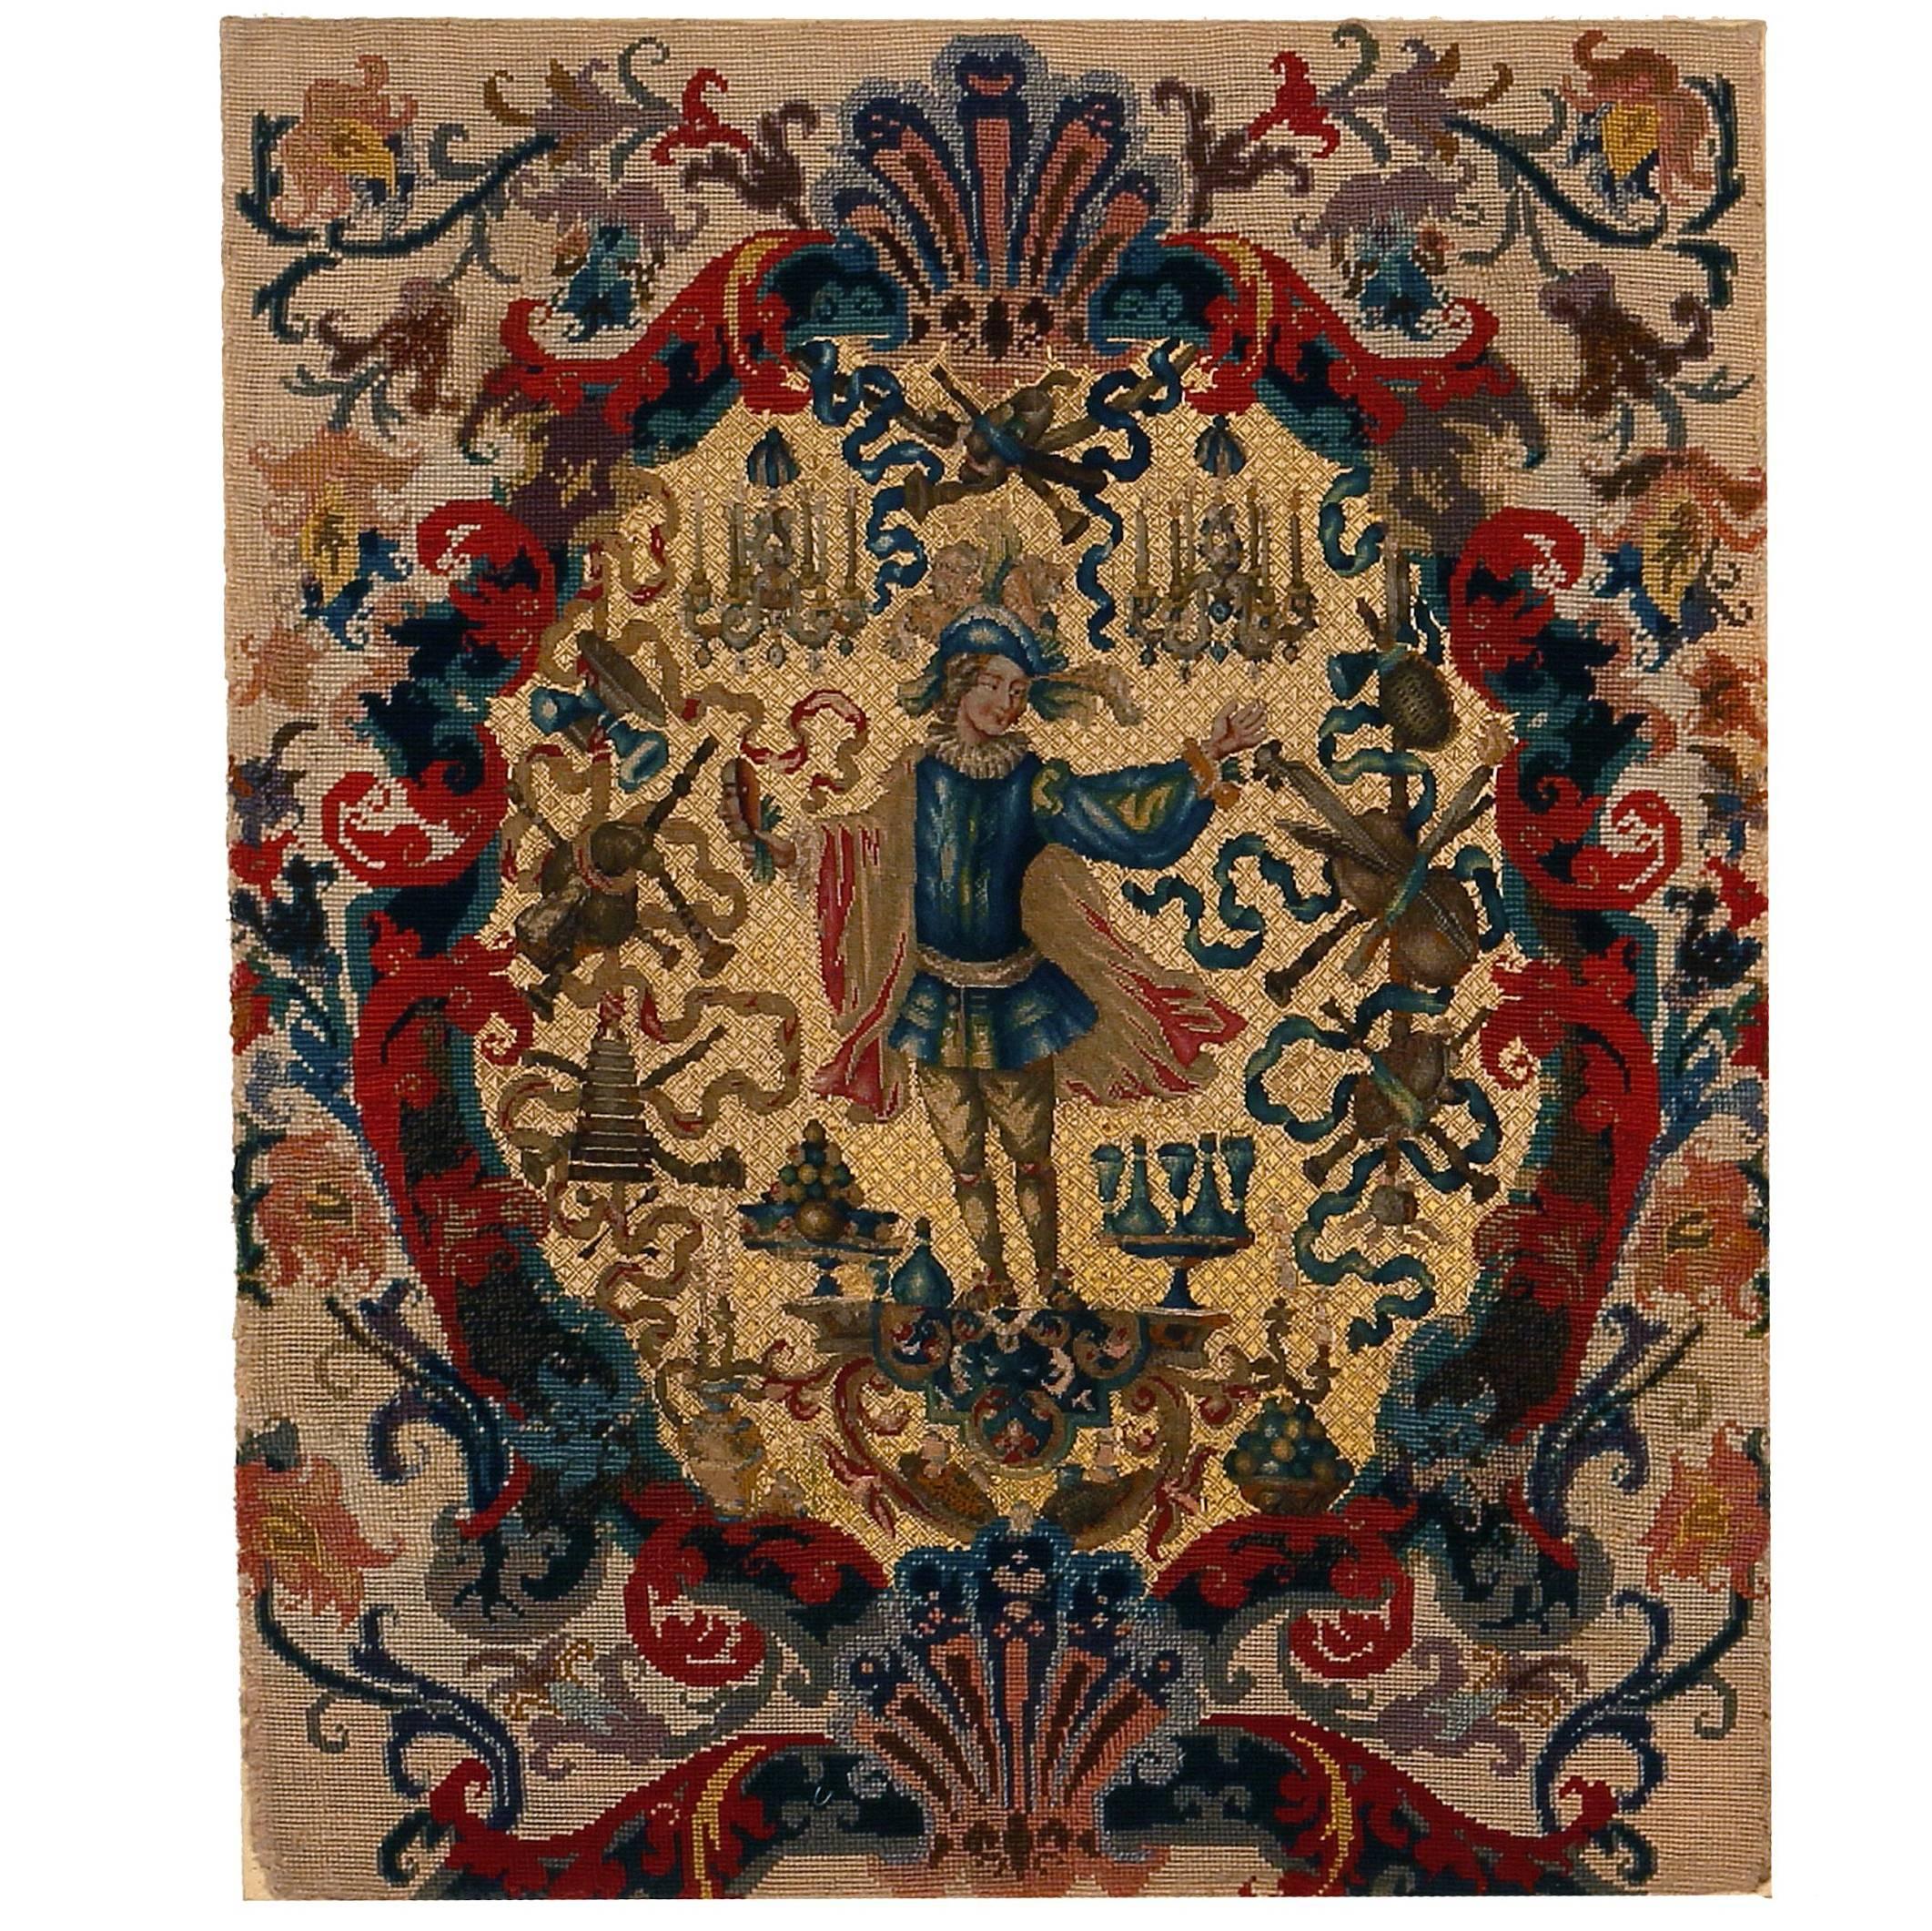 Needlepoint Picture Depicting an Allegory of Music